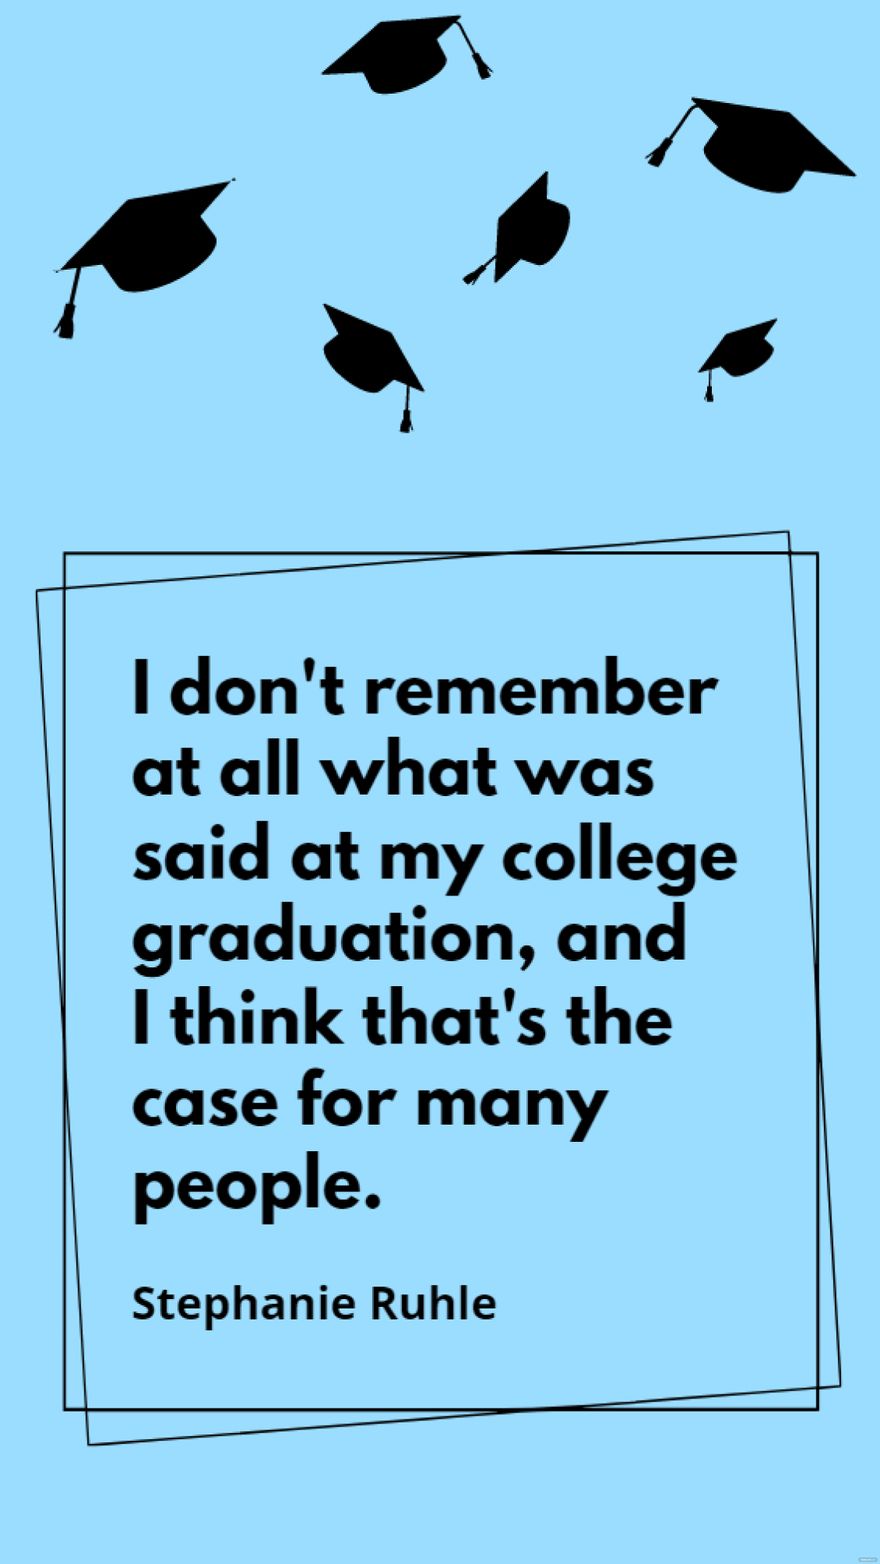 Stephanie Ruhle - I don't remember at all what was said at my college graduation, and I think that's the case for many people. in JPG